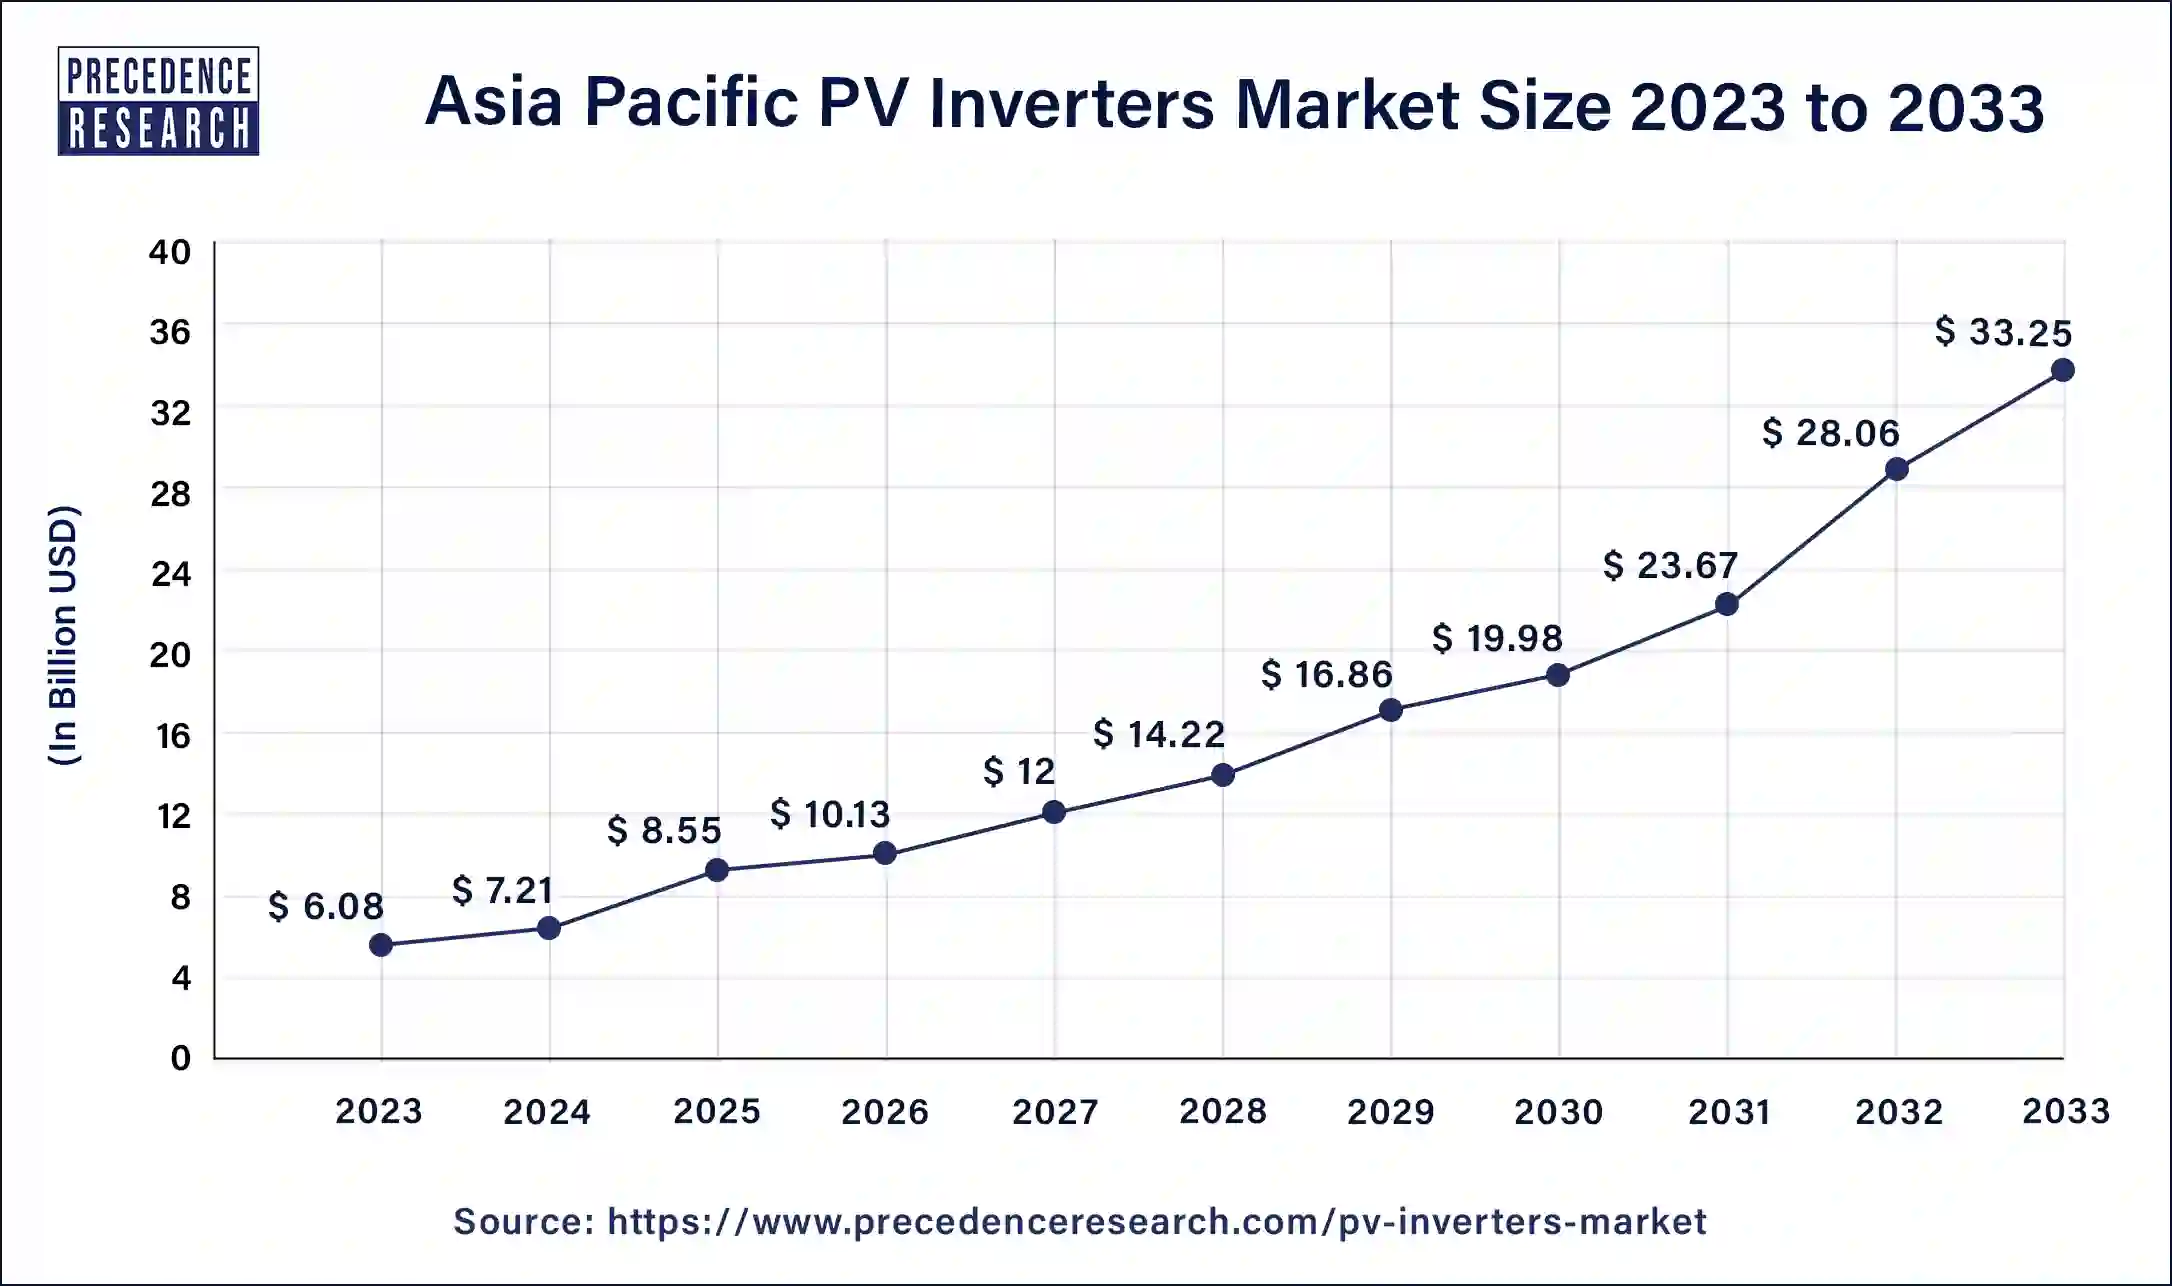 Asia Pacific PV Inverters Market Size 2024 to 2033